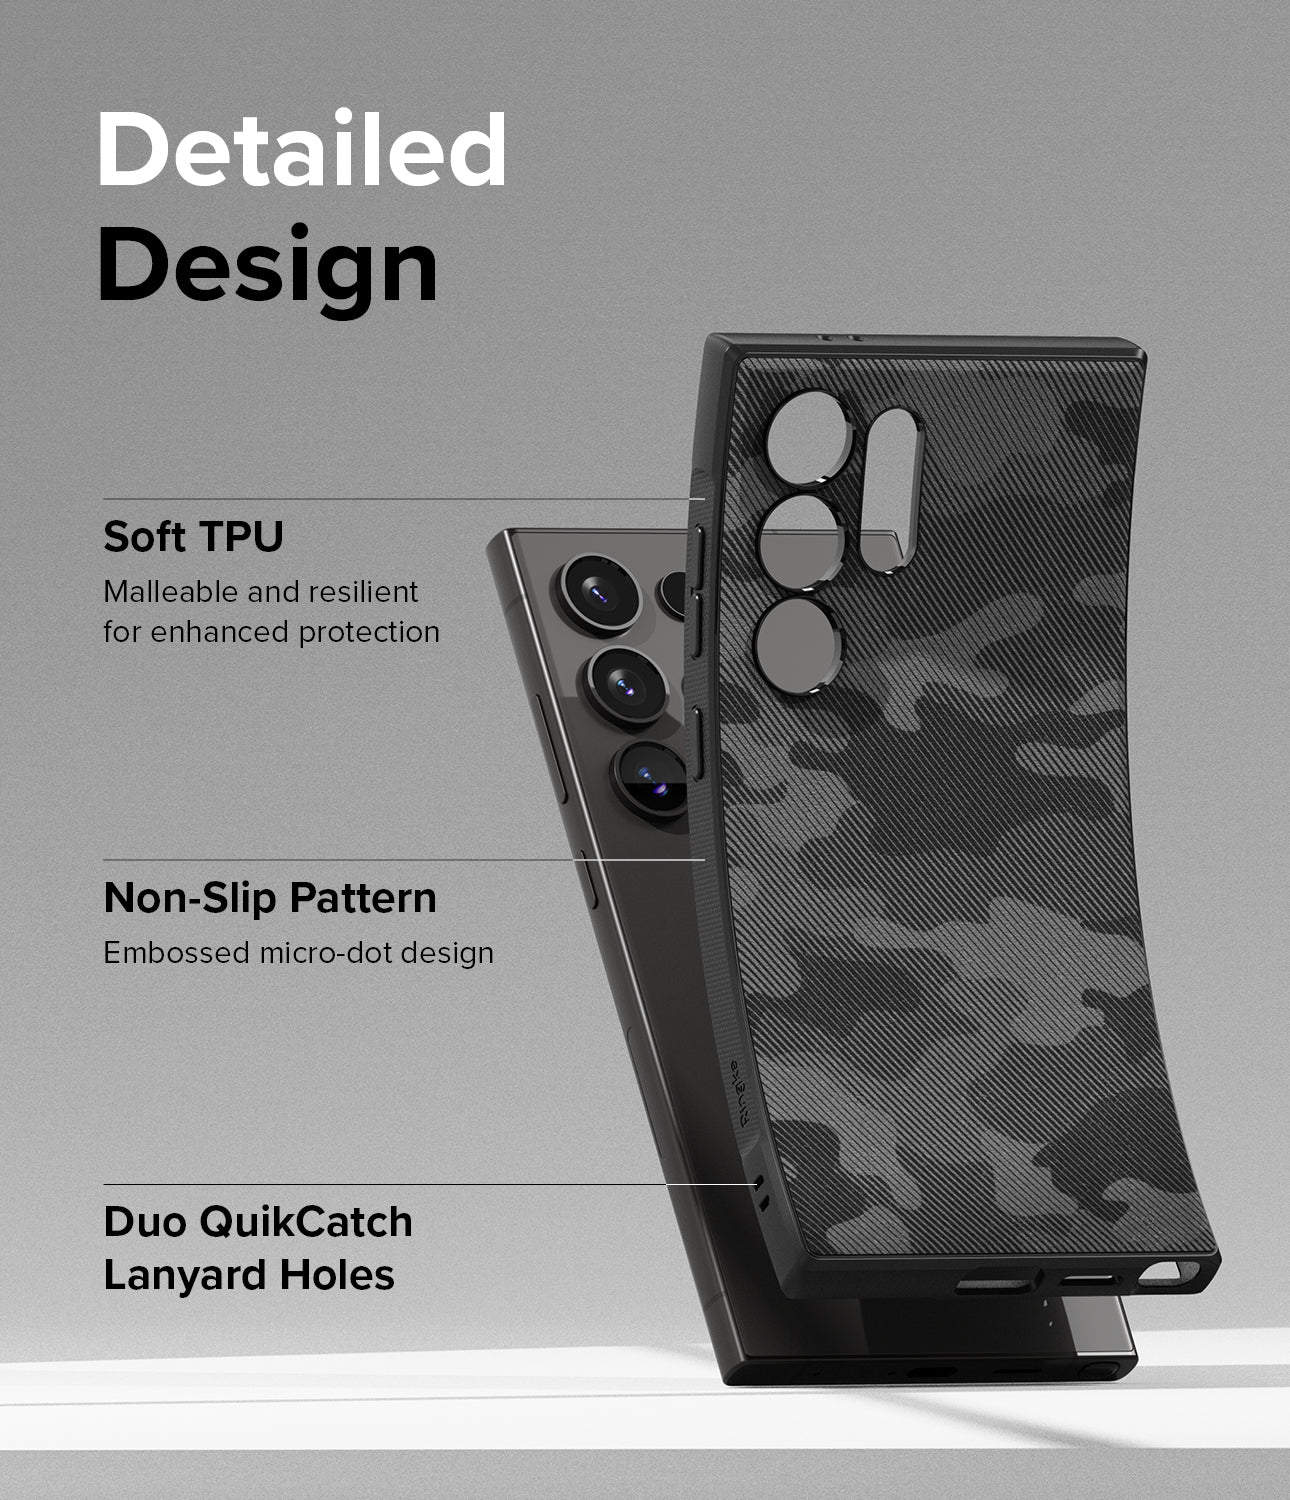 Galaxy S24 Ultra Case | Onyx Design - Detailed Design. Malleable and resilient for enhanced protection with Soft TPU. Embossed micro-dot design with non-slip pattern. Duo QuikCatch Lanyard Holes.